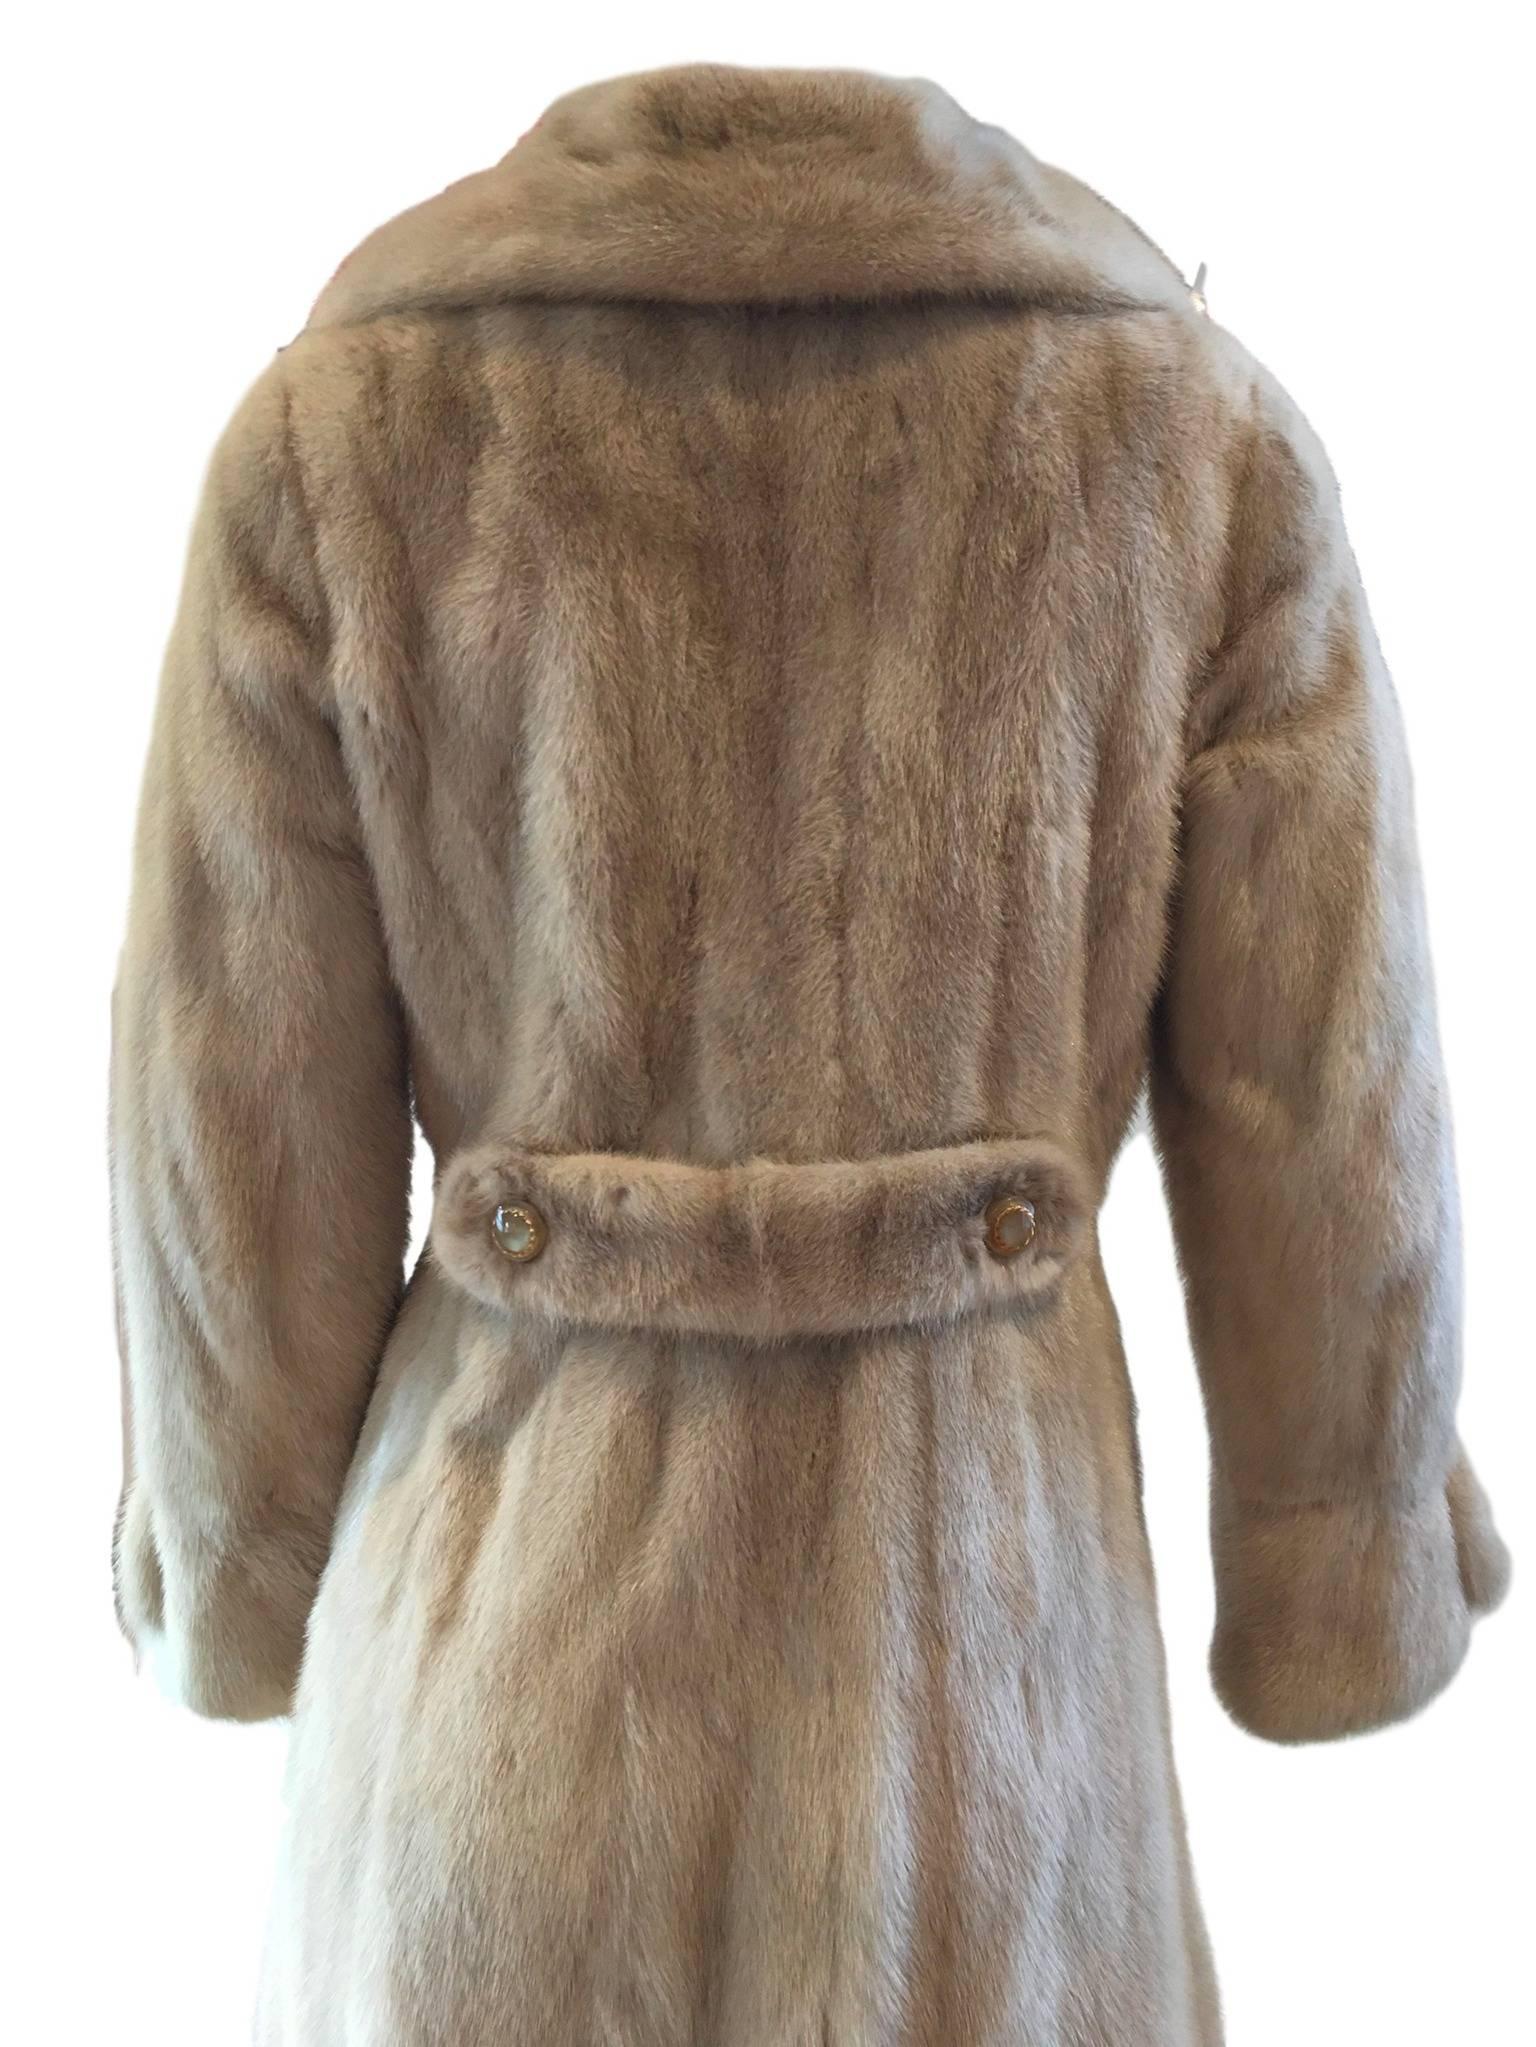 Vintage 1970s real blonde mink fur coat, satin lined and has an optional belt feature. The fur is soft and in superb condition. 

Size Uk 8. Measures 17 inches under arm to under arm, 14 inches across waist and 44 inches length from shoulder to